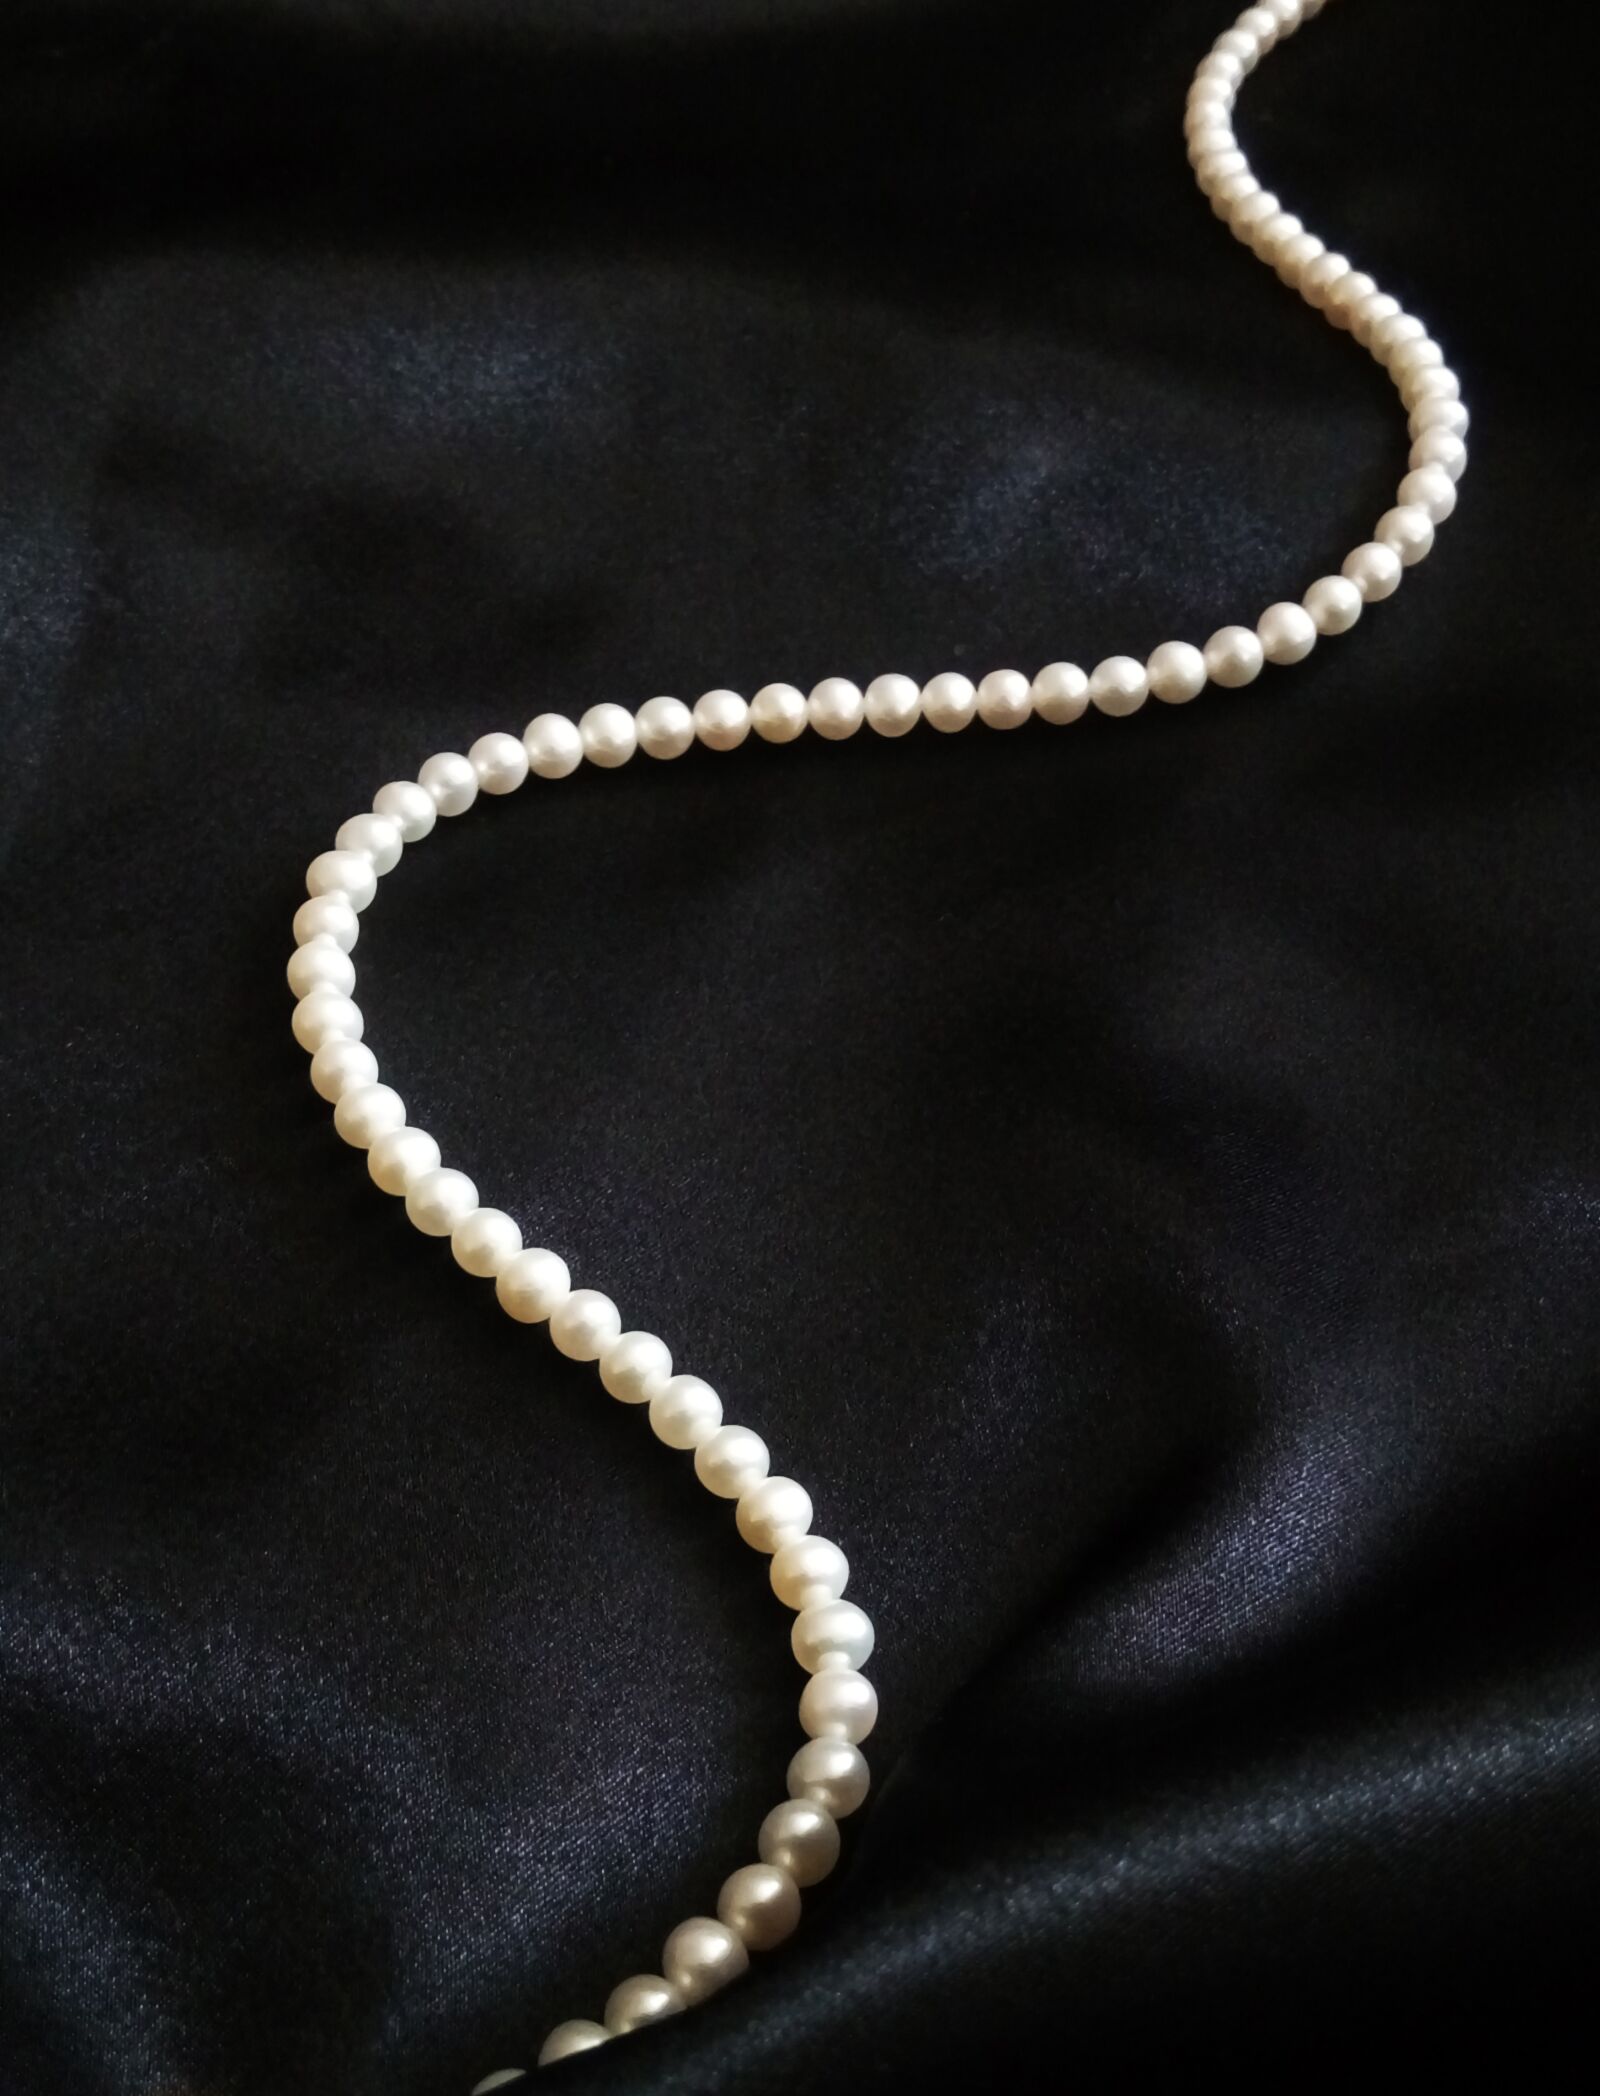 Meizu m2 sample photo. Pearl, pearl necklace, jewelry photography